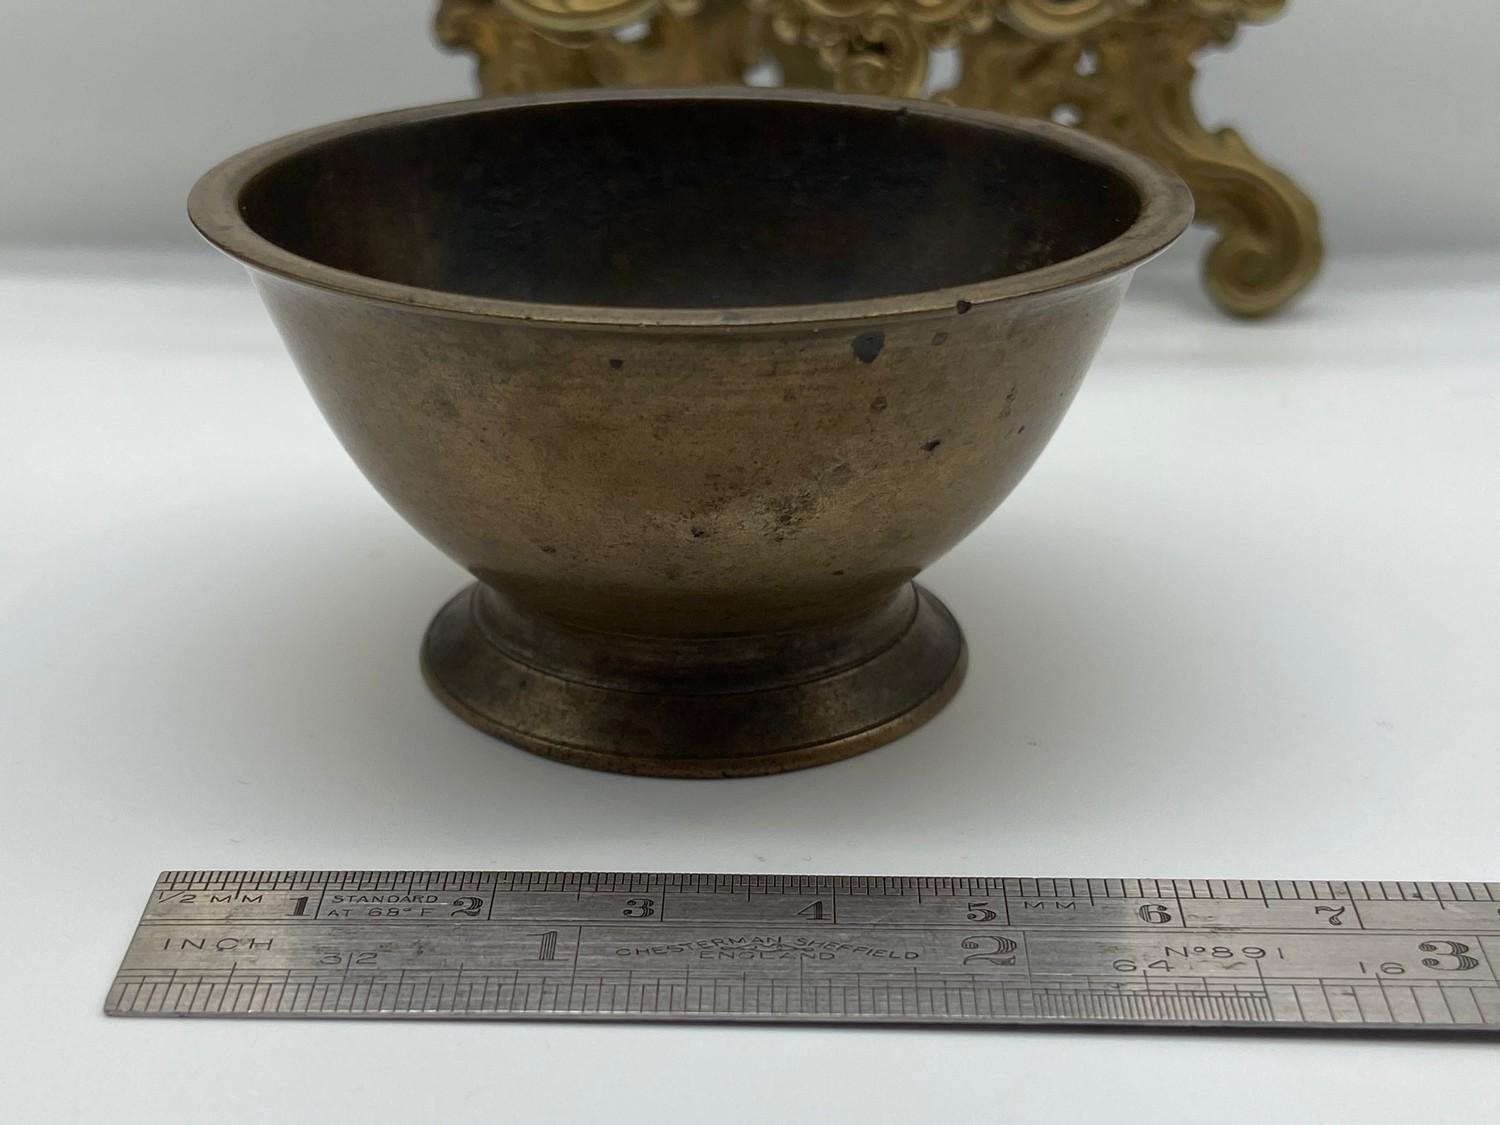 A 19th century [possibly earlier] Chinese bronze drinking cup. [3.5cm height, 6.7cm diameter]